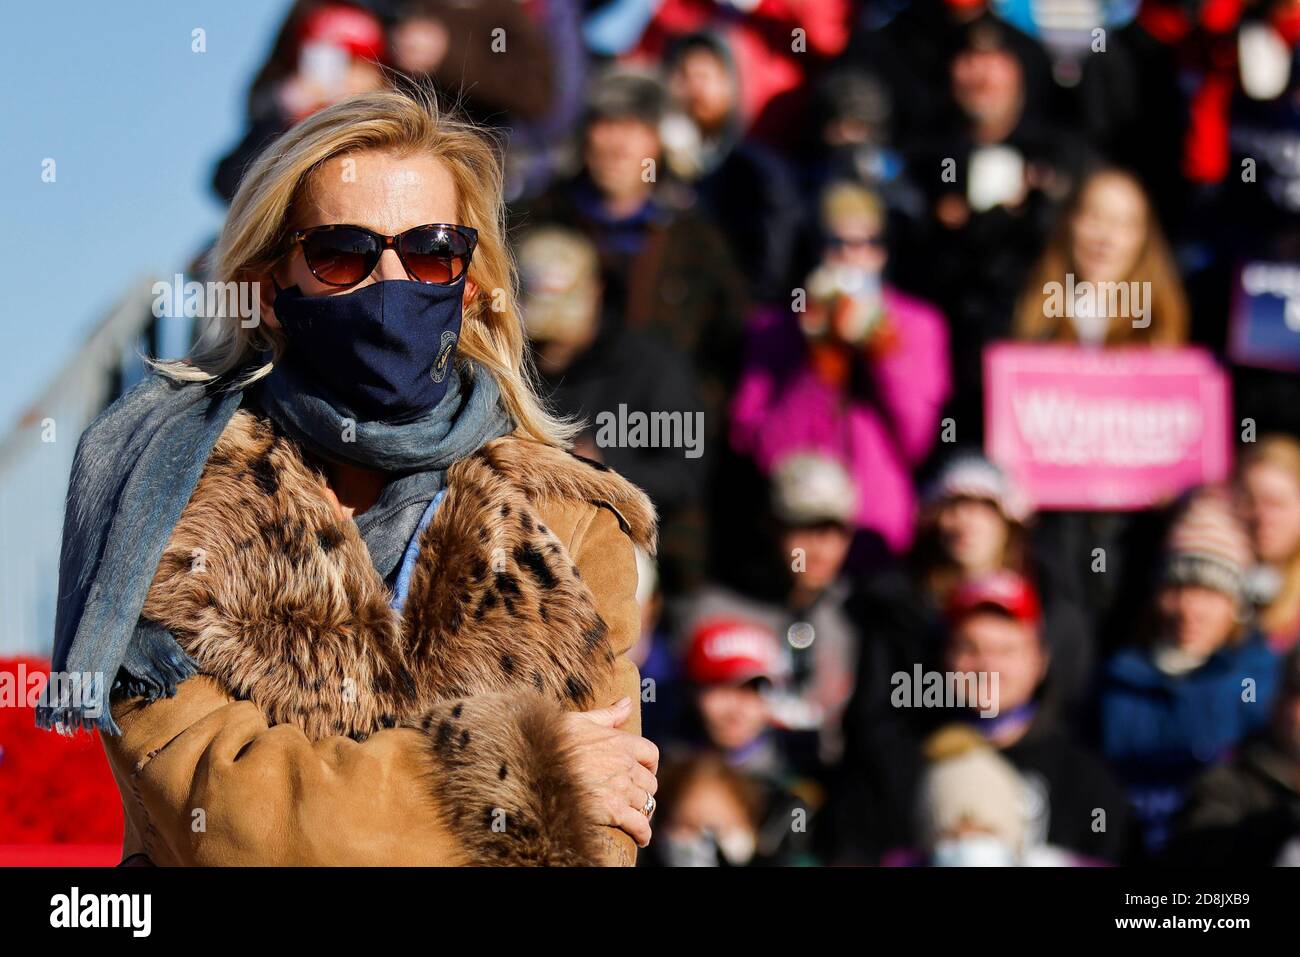 Laura Ingraham, TV host in Fox News, attends U.S. President Donald Trump's campaign rally at Green Bay Austin Straubel International Airport in Green Bay, Wisconsin, U.S., October 30, 2020. REUTERS/Carlos Barria Stock Photo